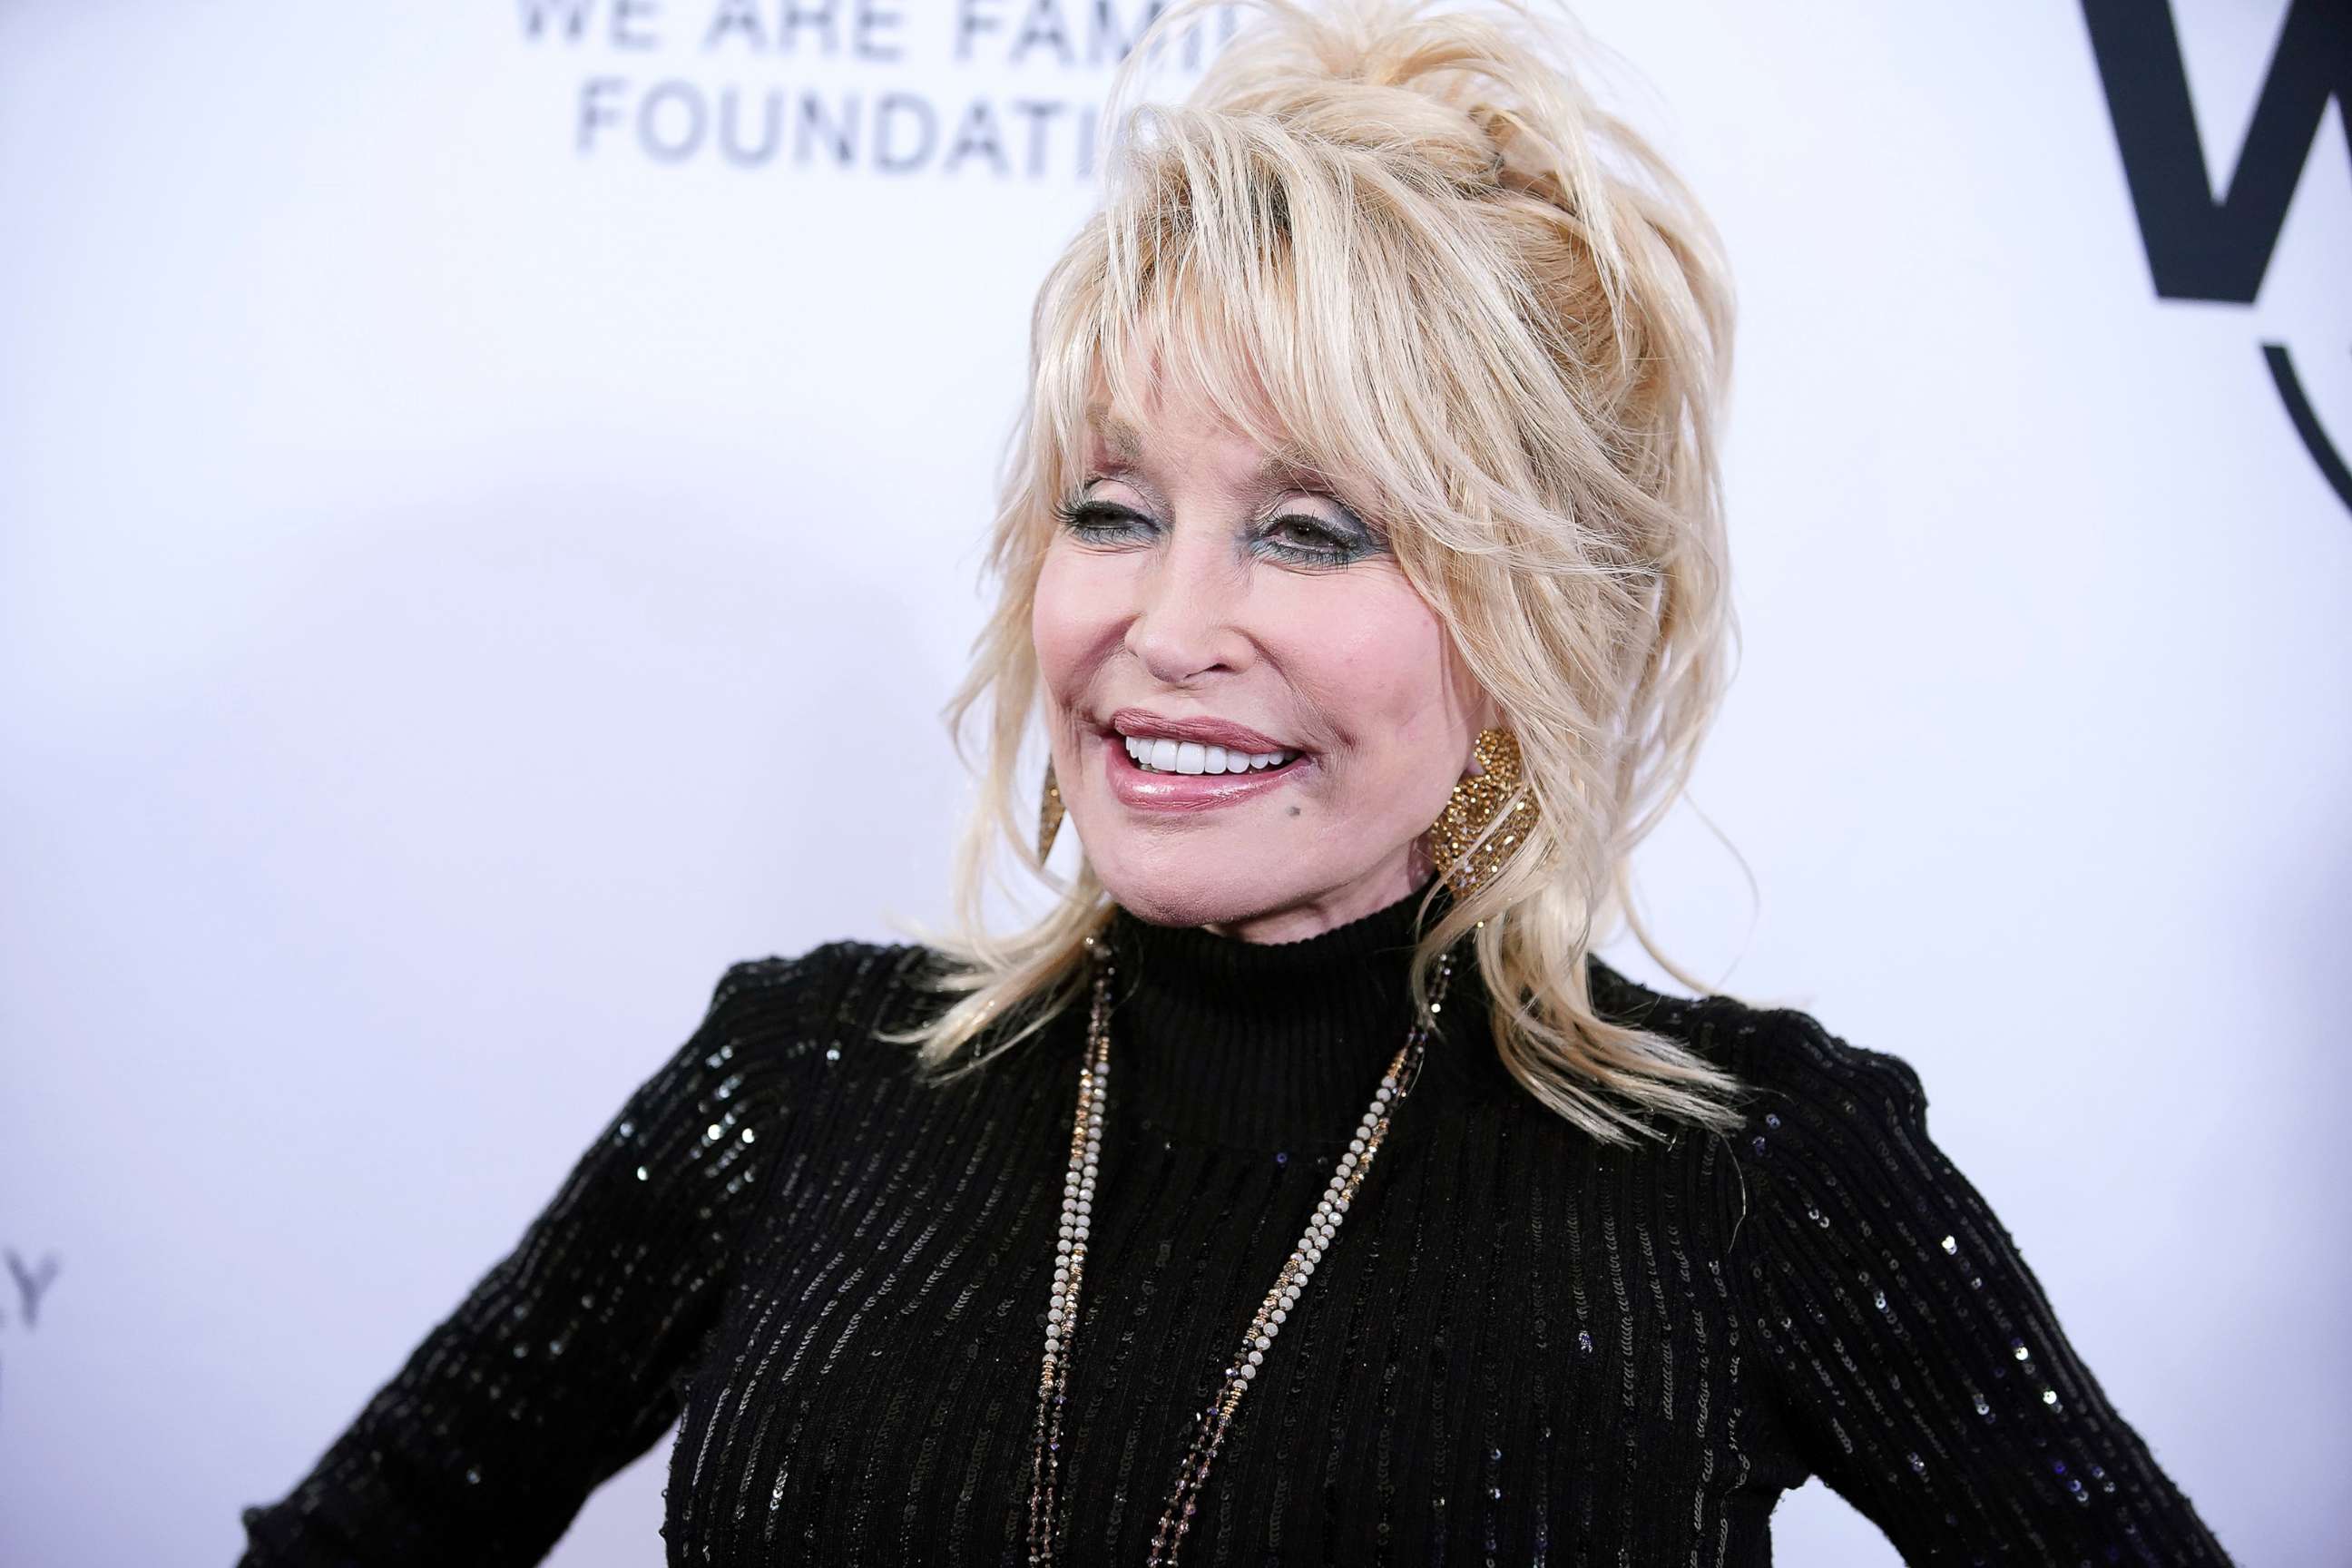 PHOTO: Dolly Parton attends We Are Family Foundation honors Dolly Parton & Jean Paul Gaultier at Hammerstein Ballroom on Nov. 05, 2019 in New York City.